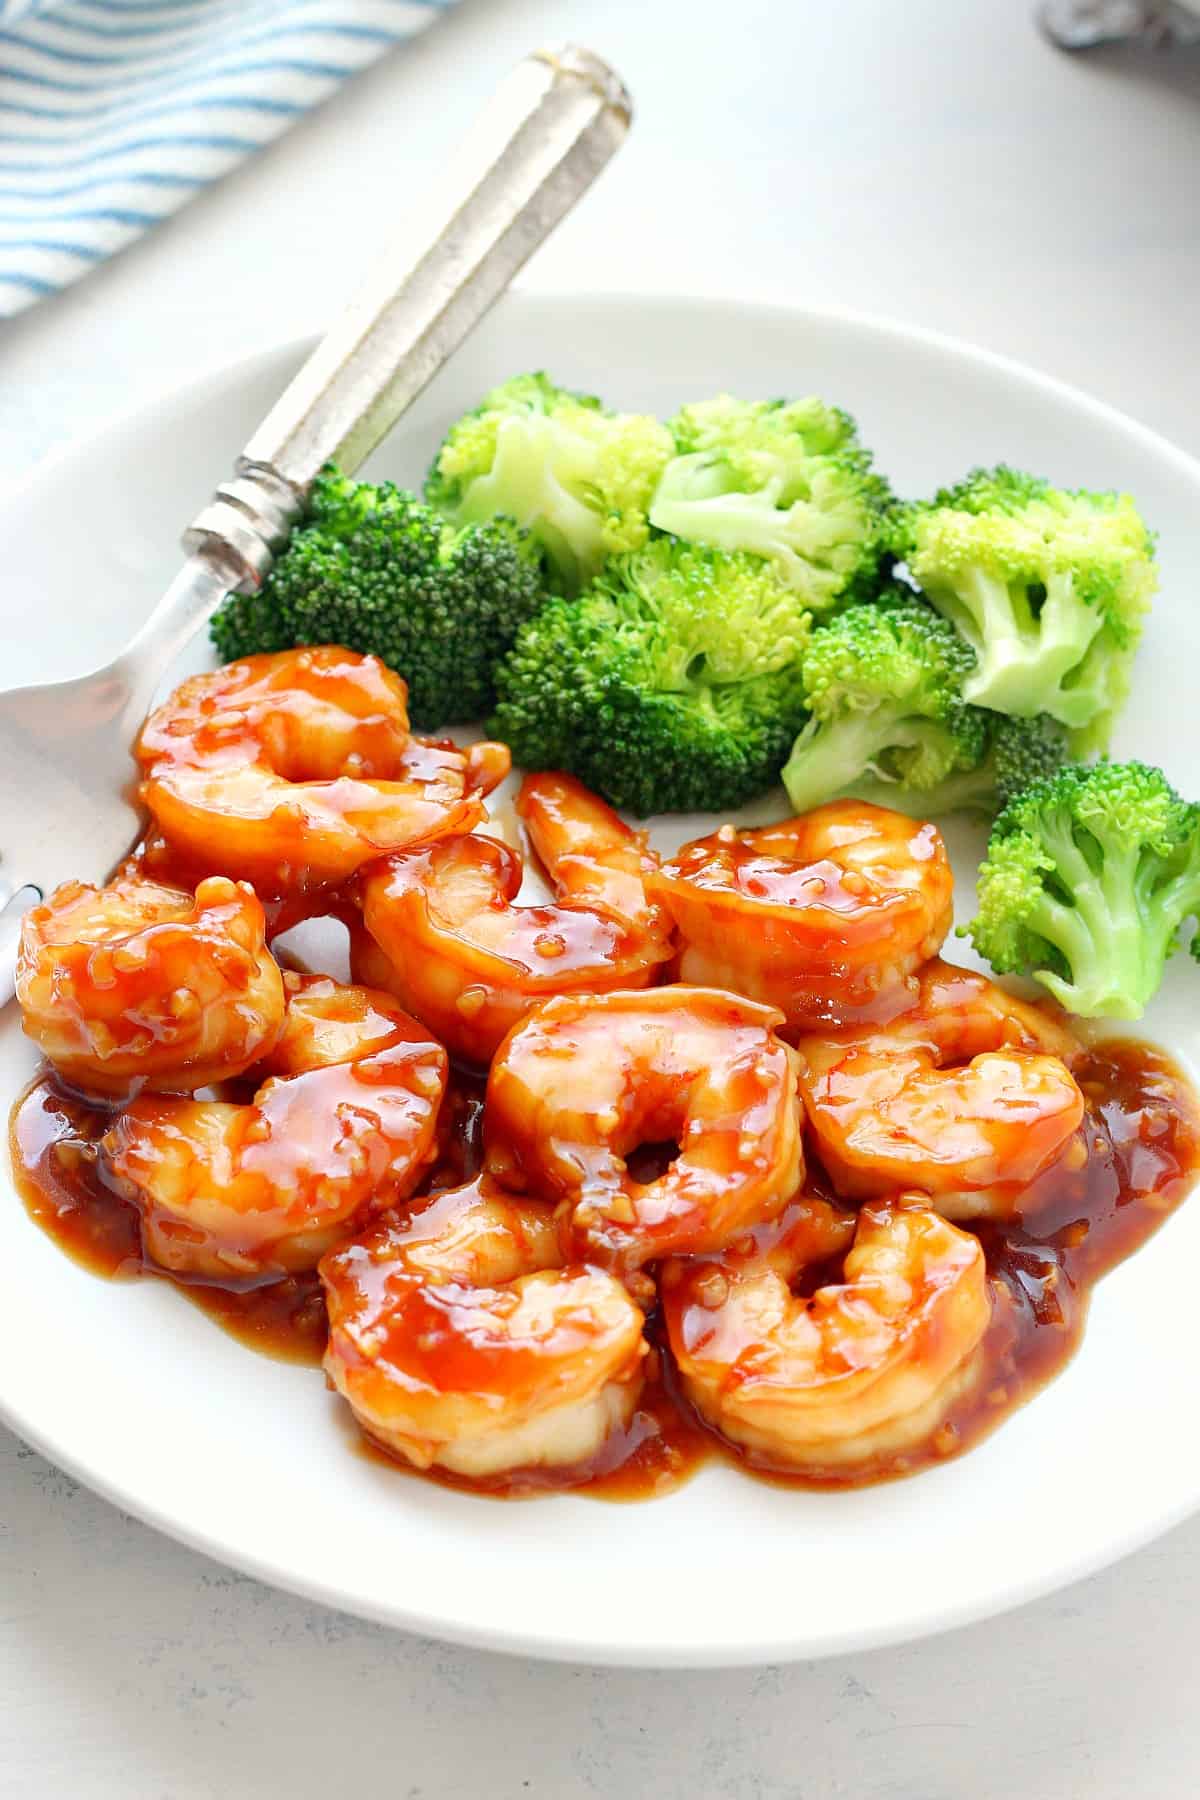 Shrimp with sauce and broccoli on a white plate.